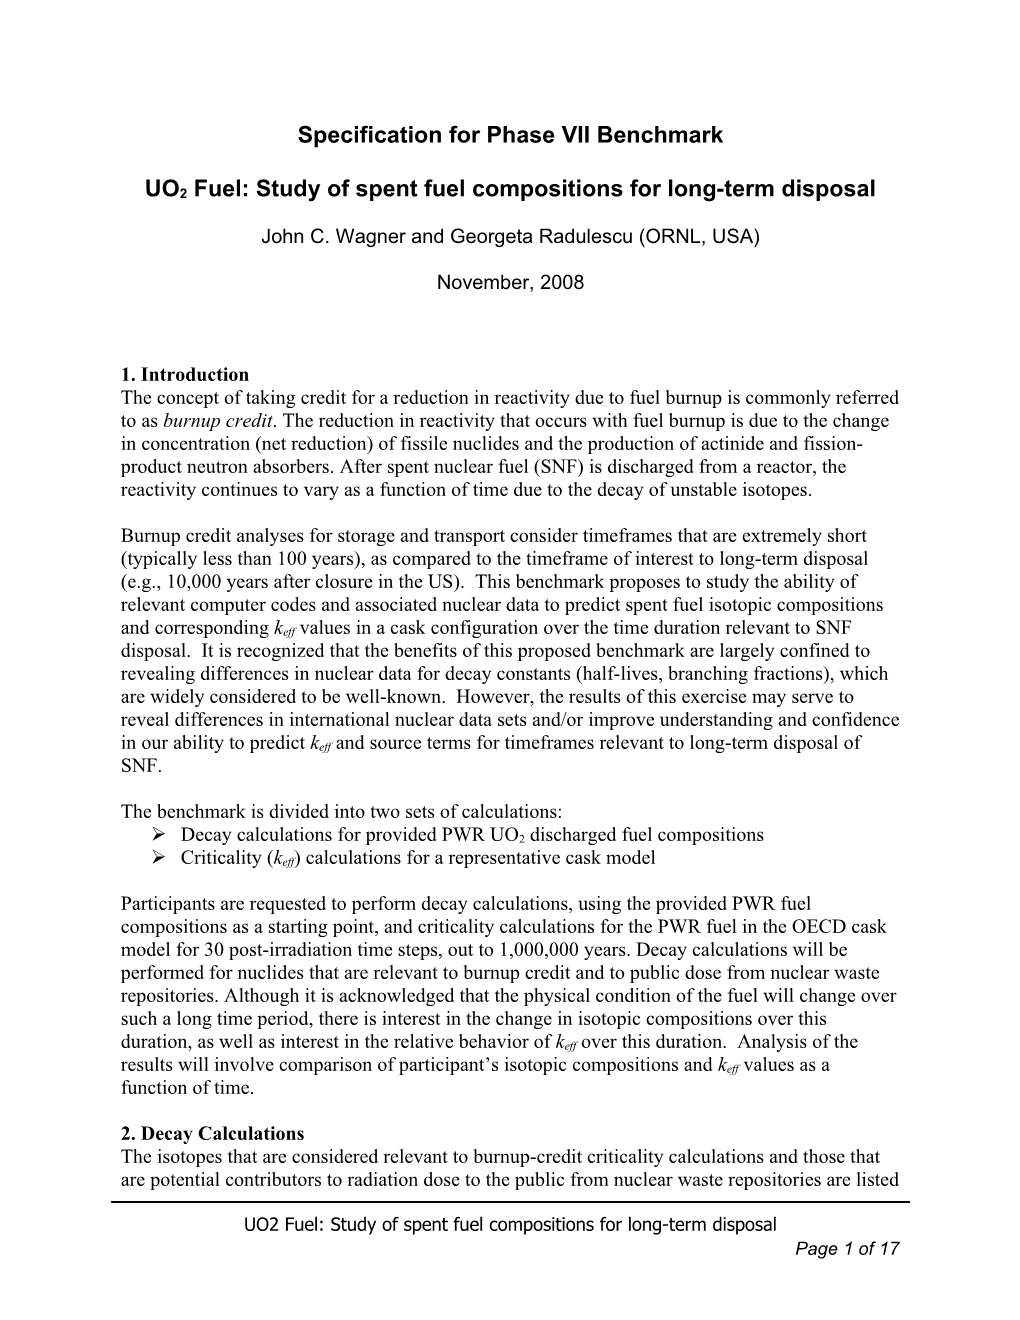 UO2 Fuel: Study of Spent Fuel Compositions for Long-Term Disposal